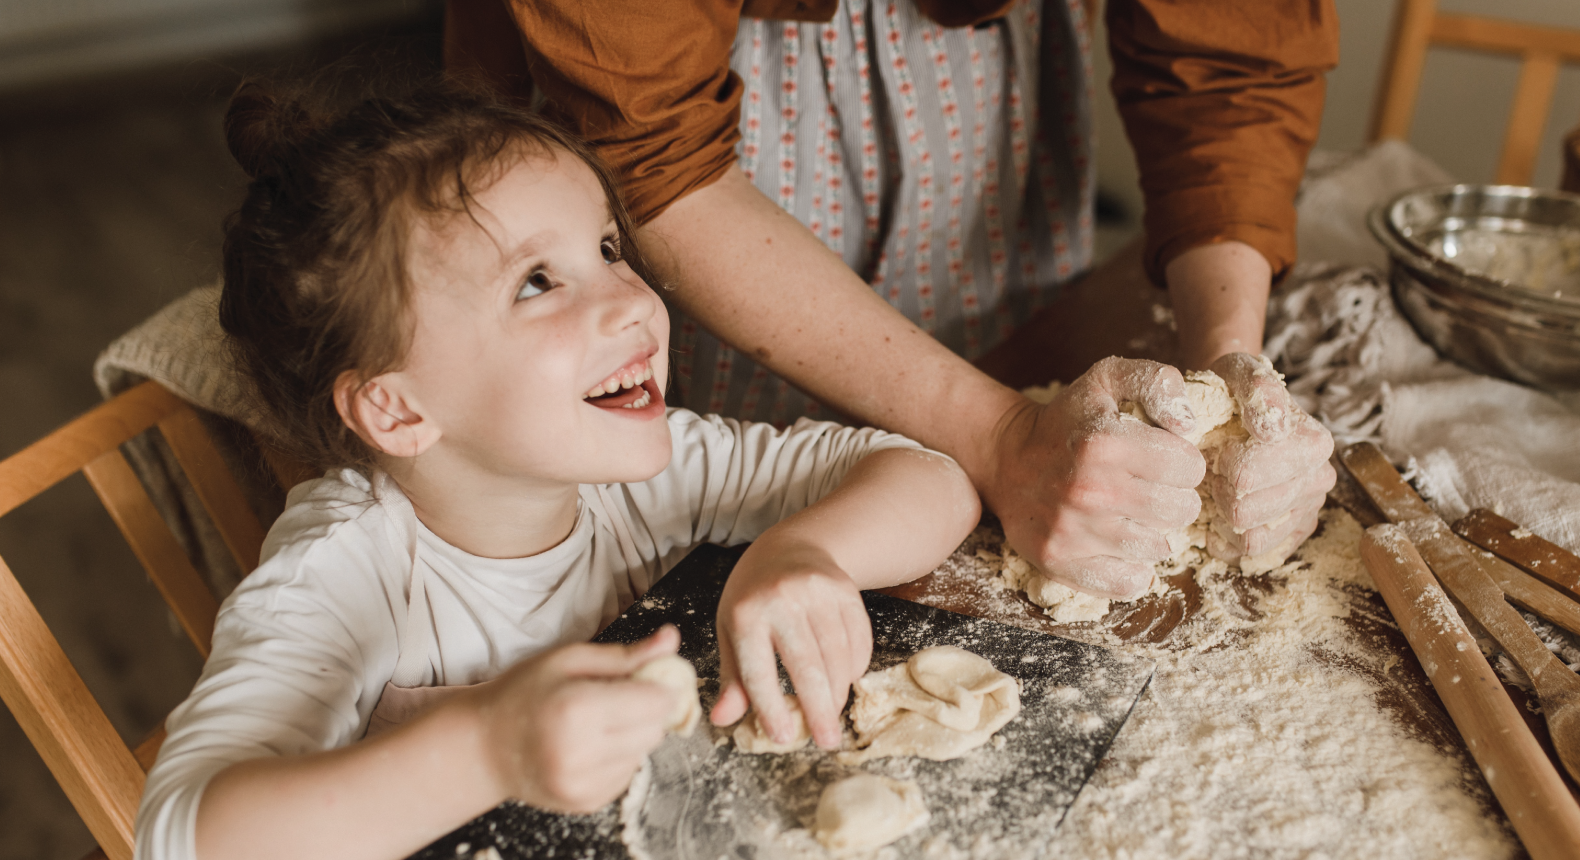 A child looks up from the dough with a smile